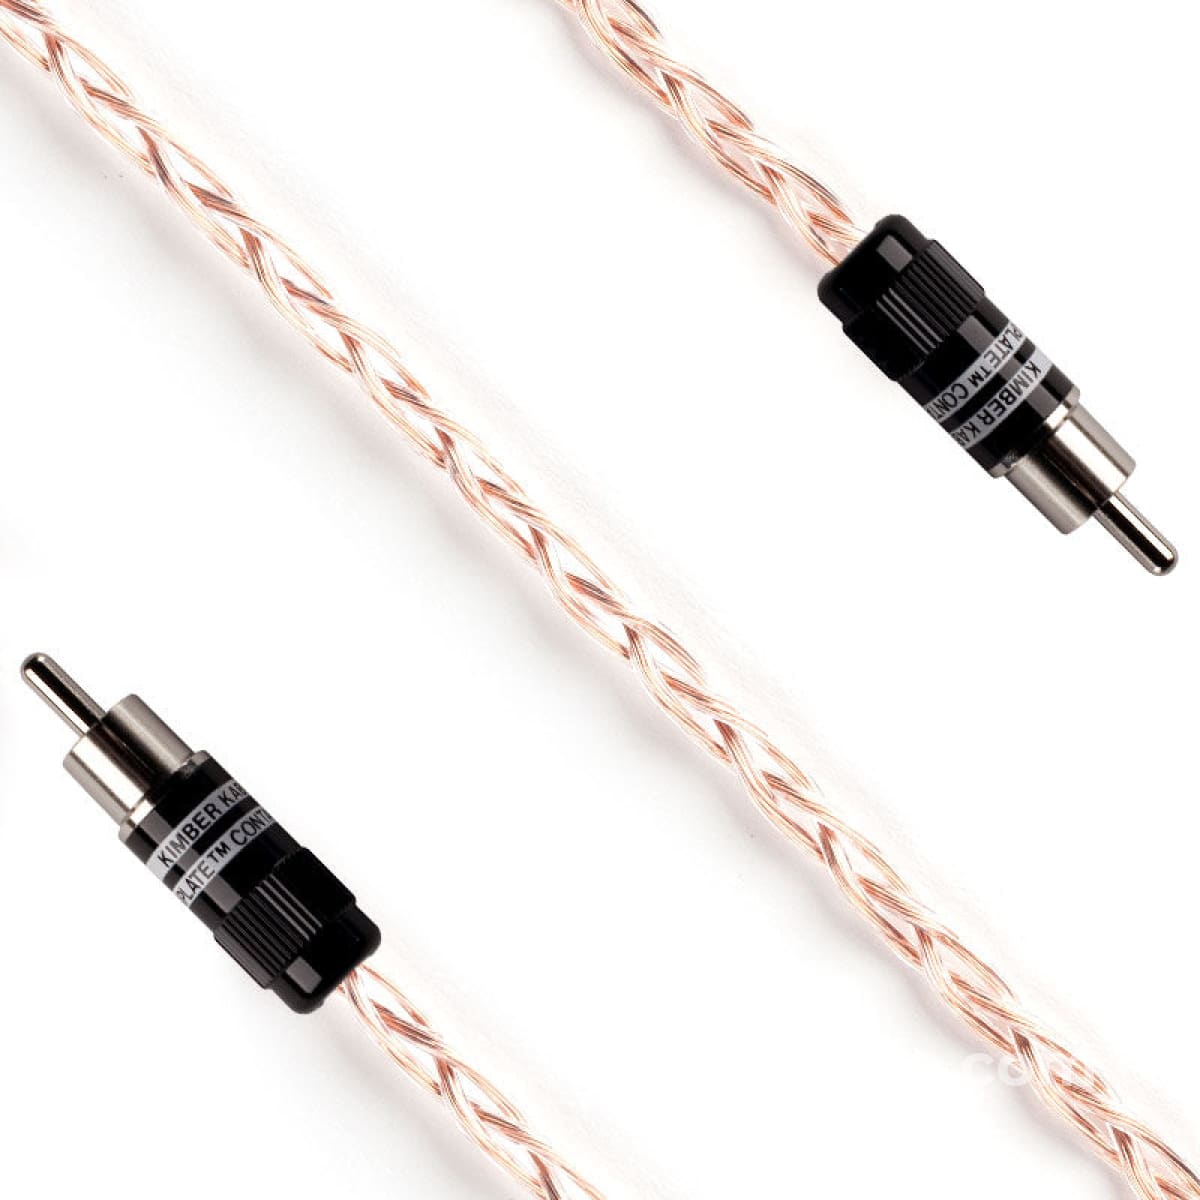 Kimber Kable - Base Series Timbre Analog Interconnects (Pair) Rca Ultraplate Or Wbt Connectors New